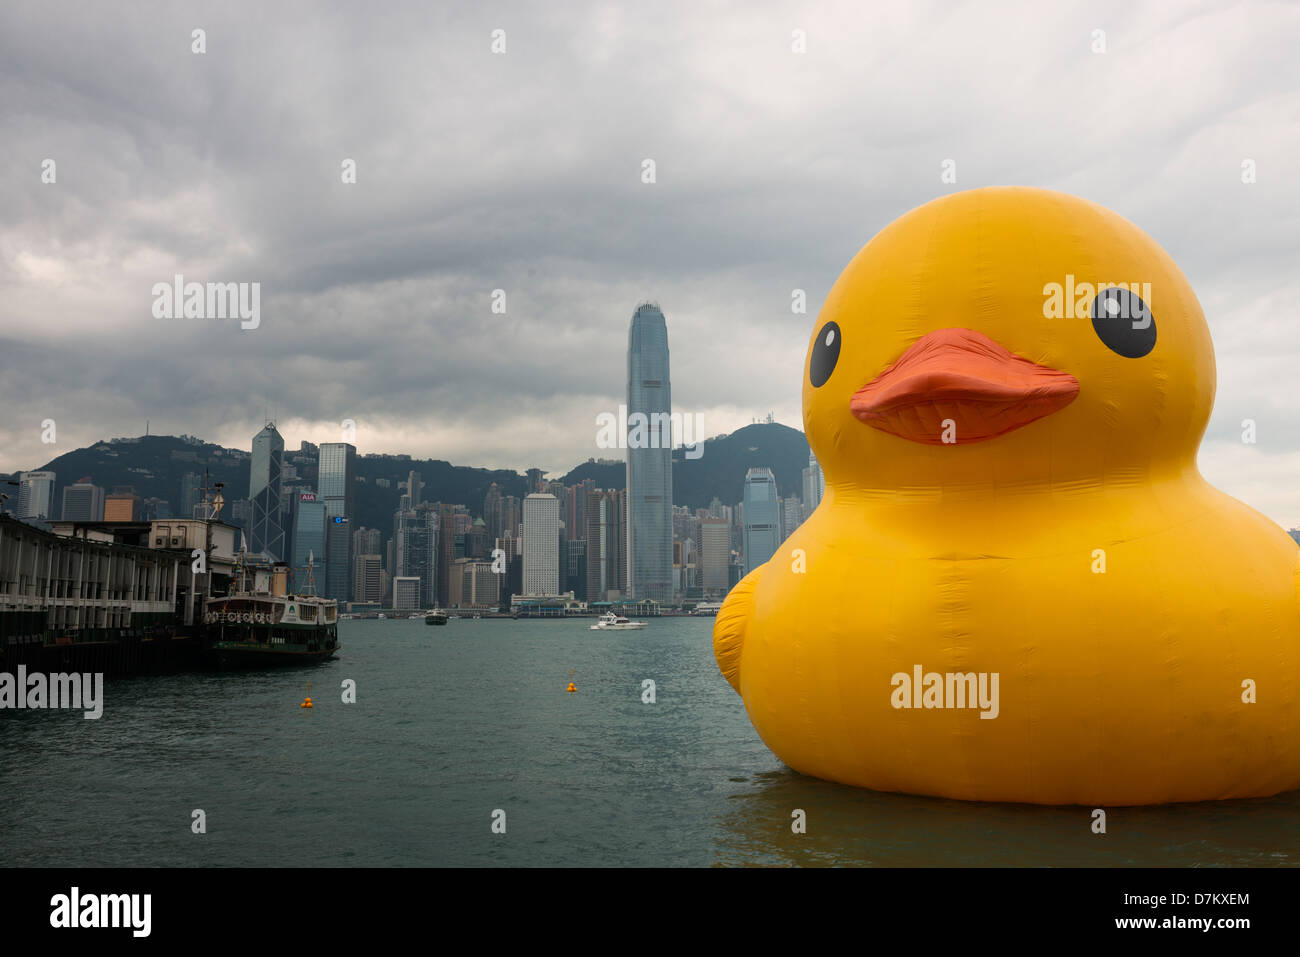 Inflatable rubber duck art exhibition in Hong Kong Harbour May 2013 Stock Photo